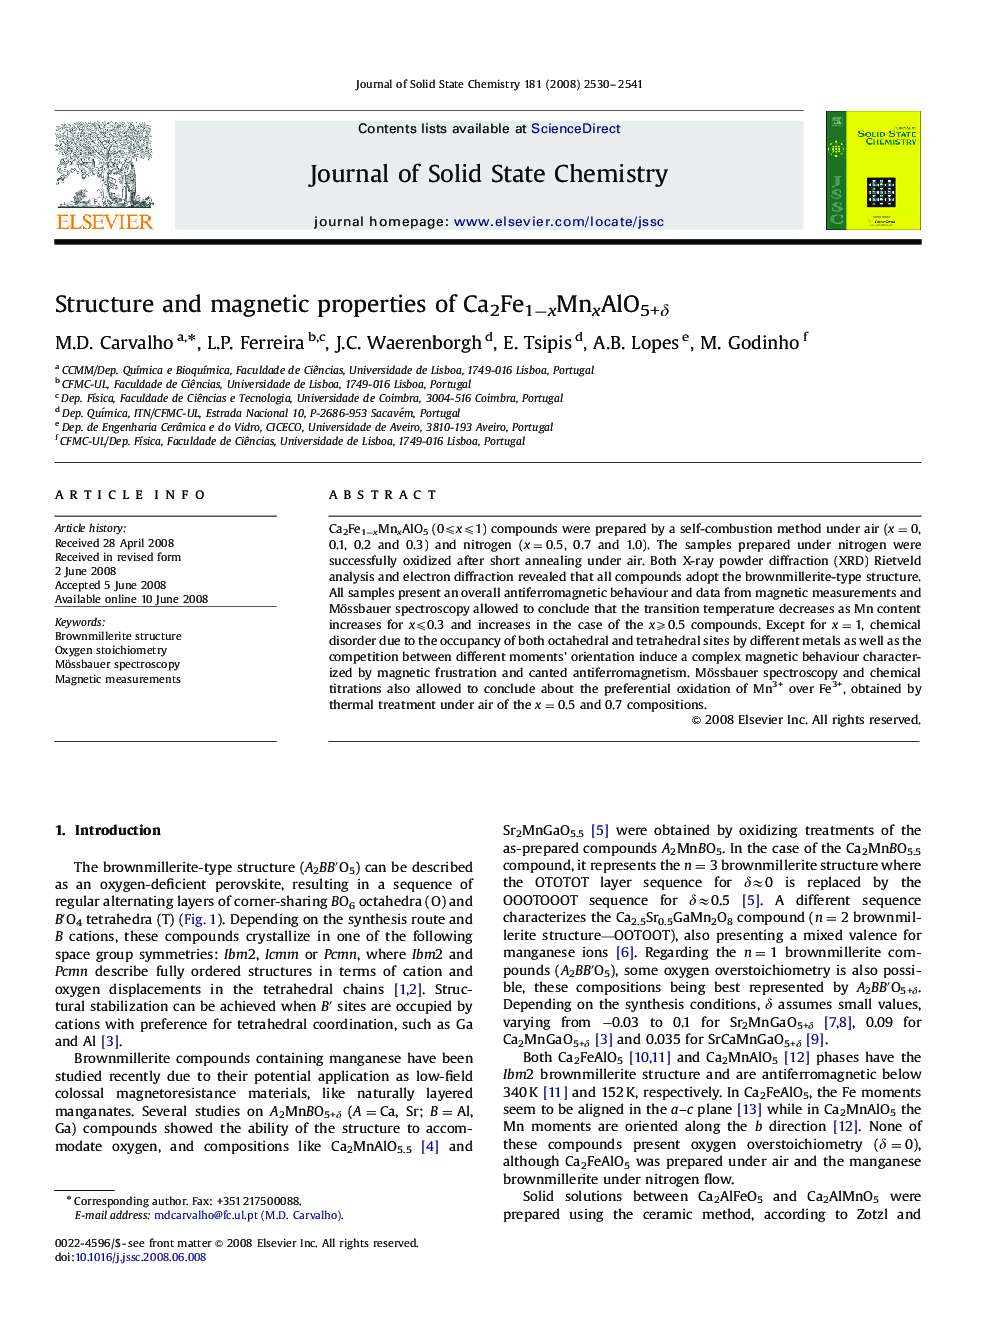 Structure and magnetic properties of Ca2Fe1−xMnxAlO5+δ